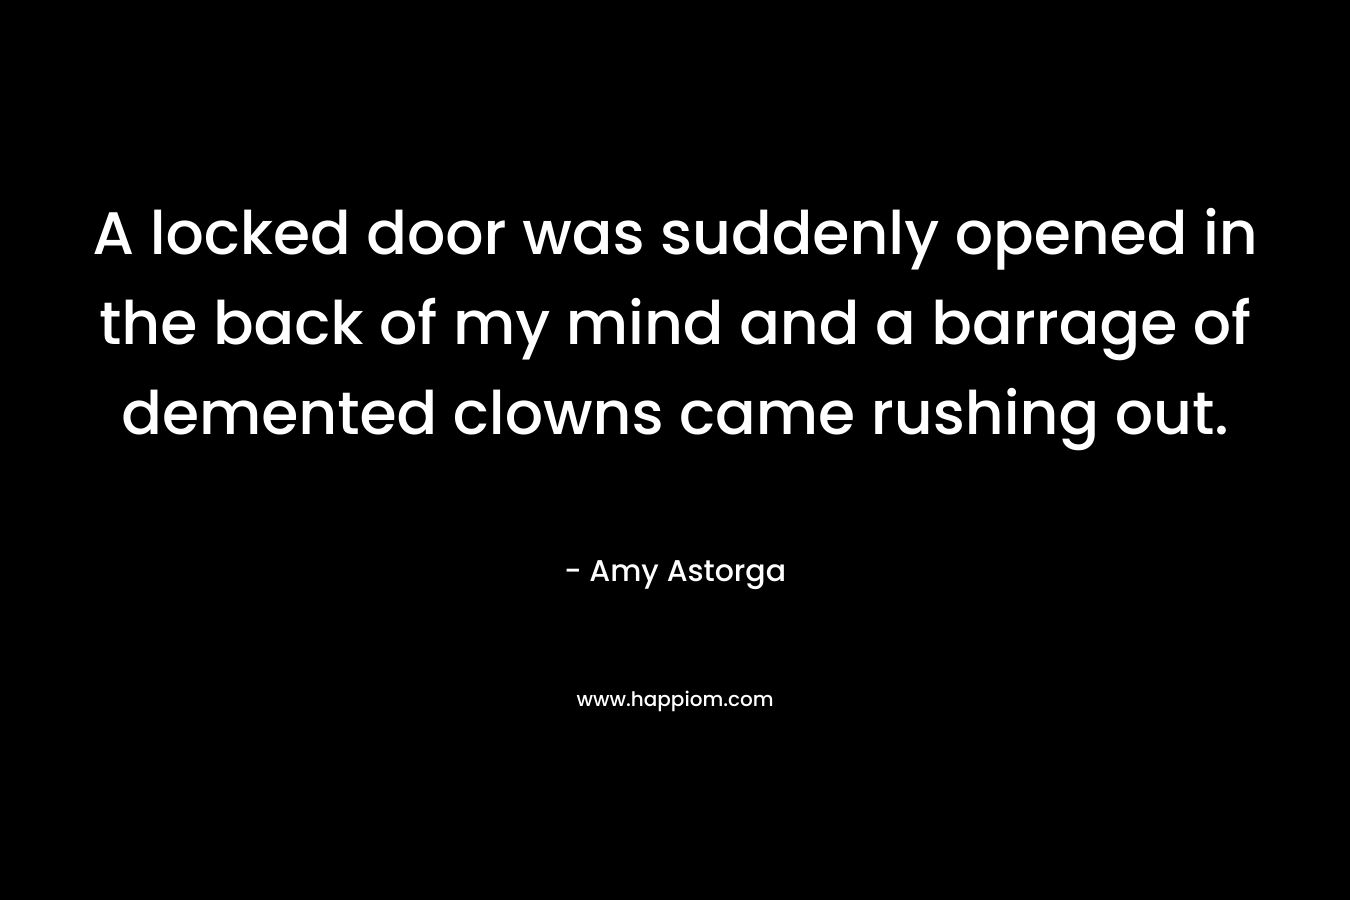 A locked door was suddenly opened in the back of my mind and a barrage of demented clowns came rushing out. – Amy Astorga